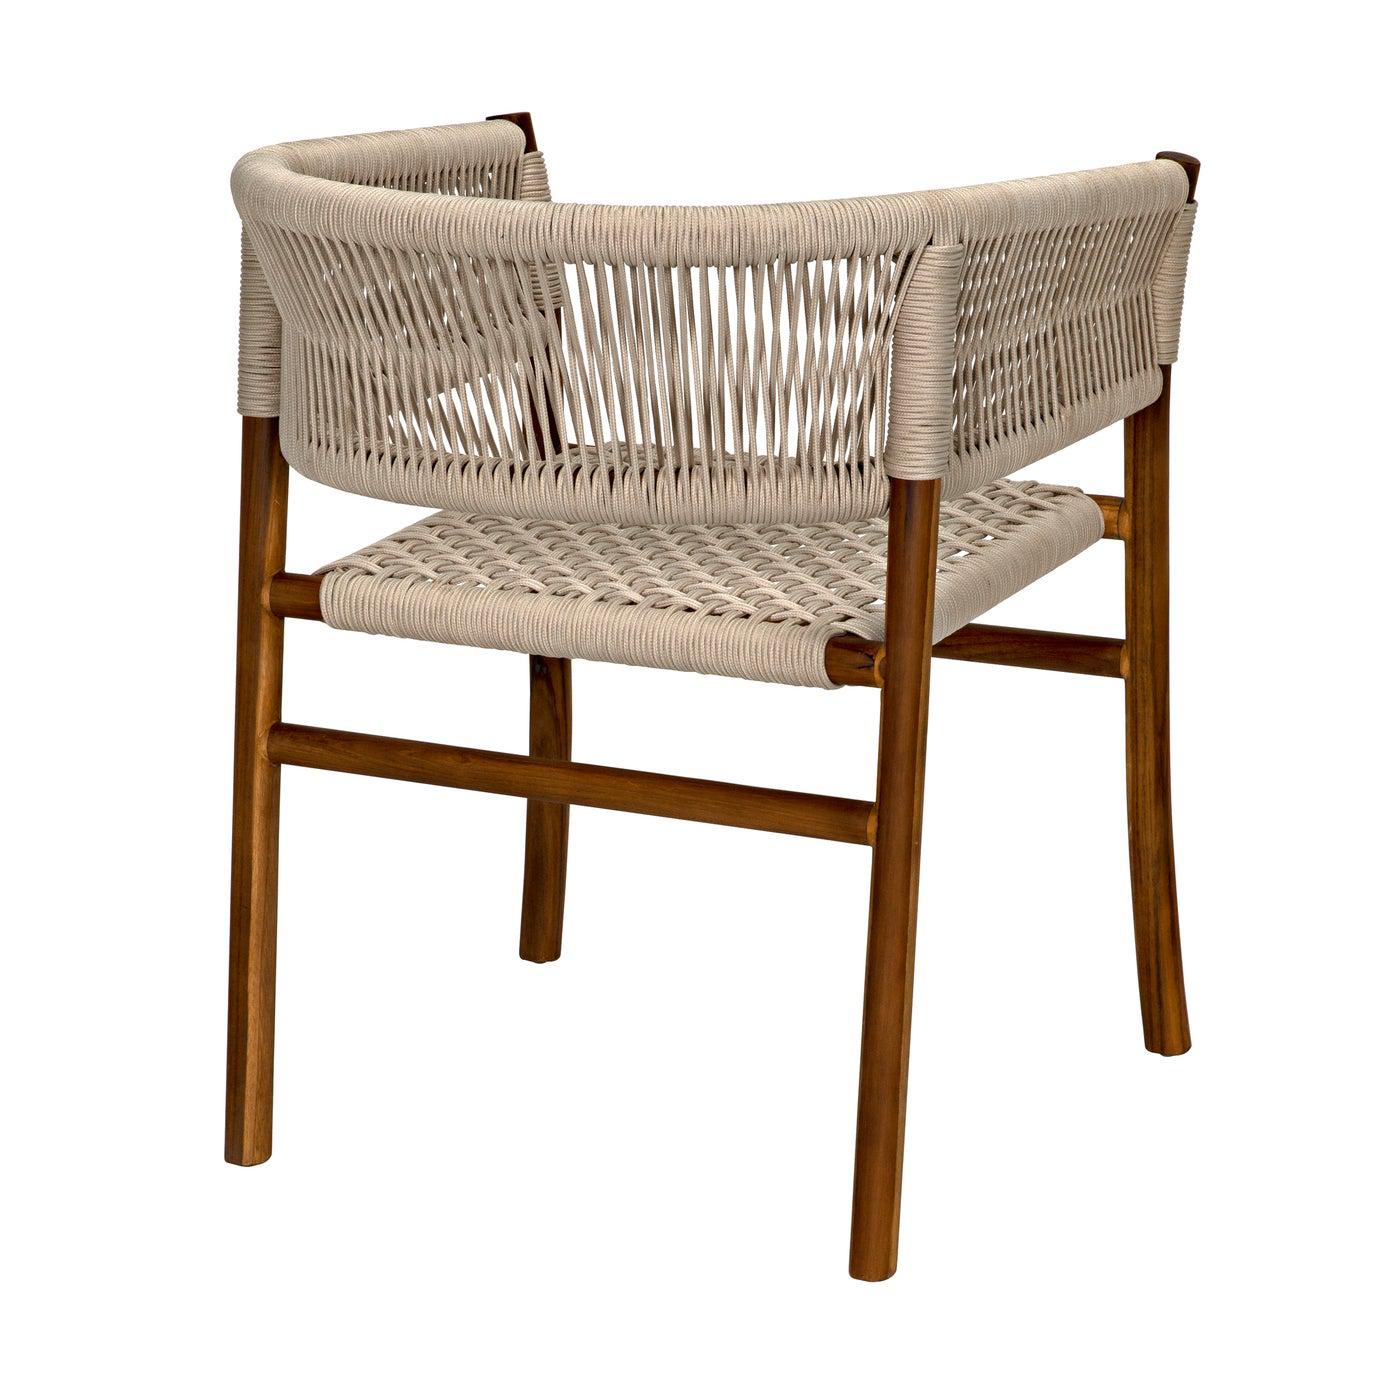 Conrad Chair, Teak with Woven Rope